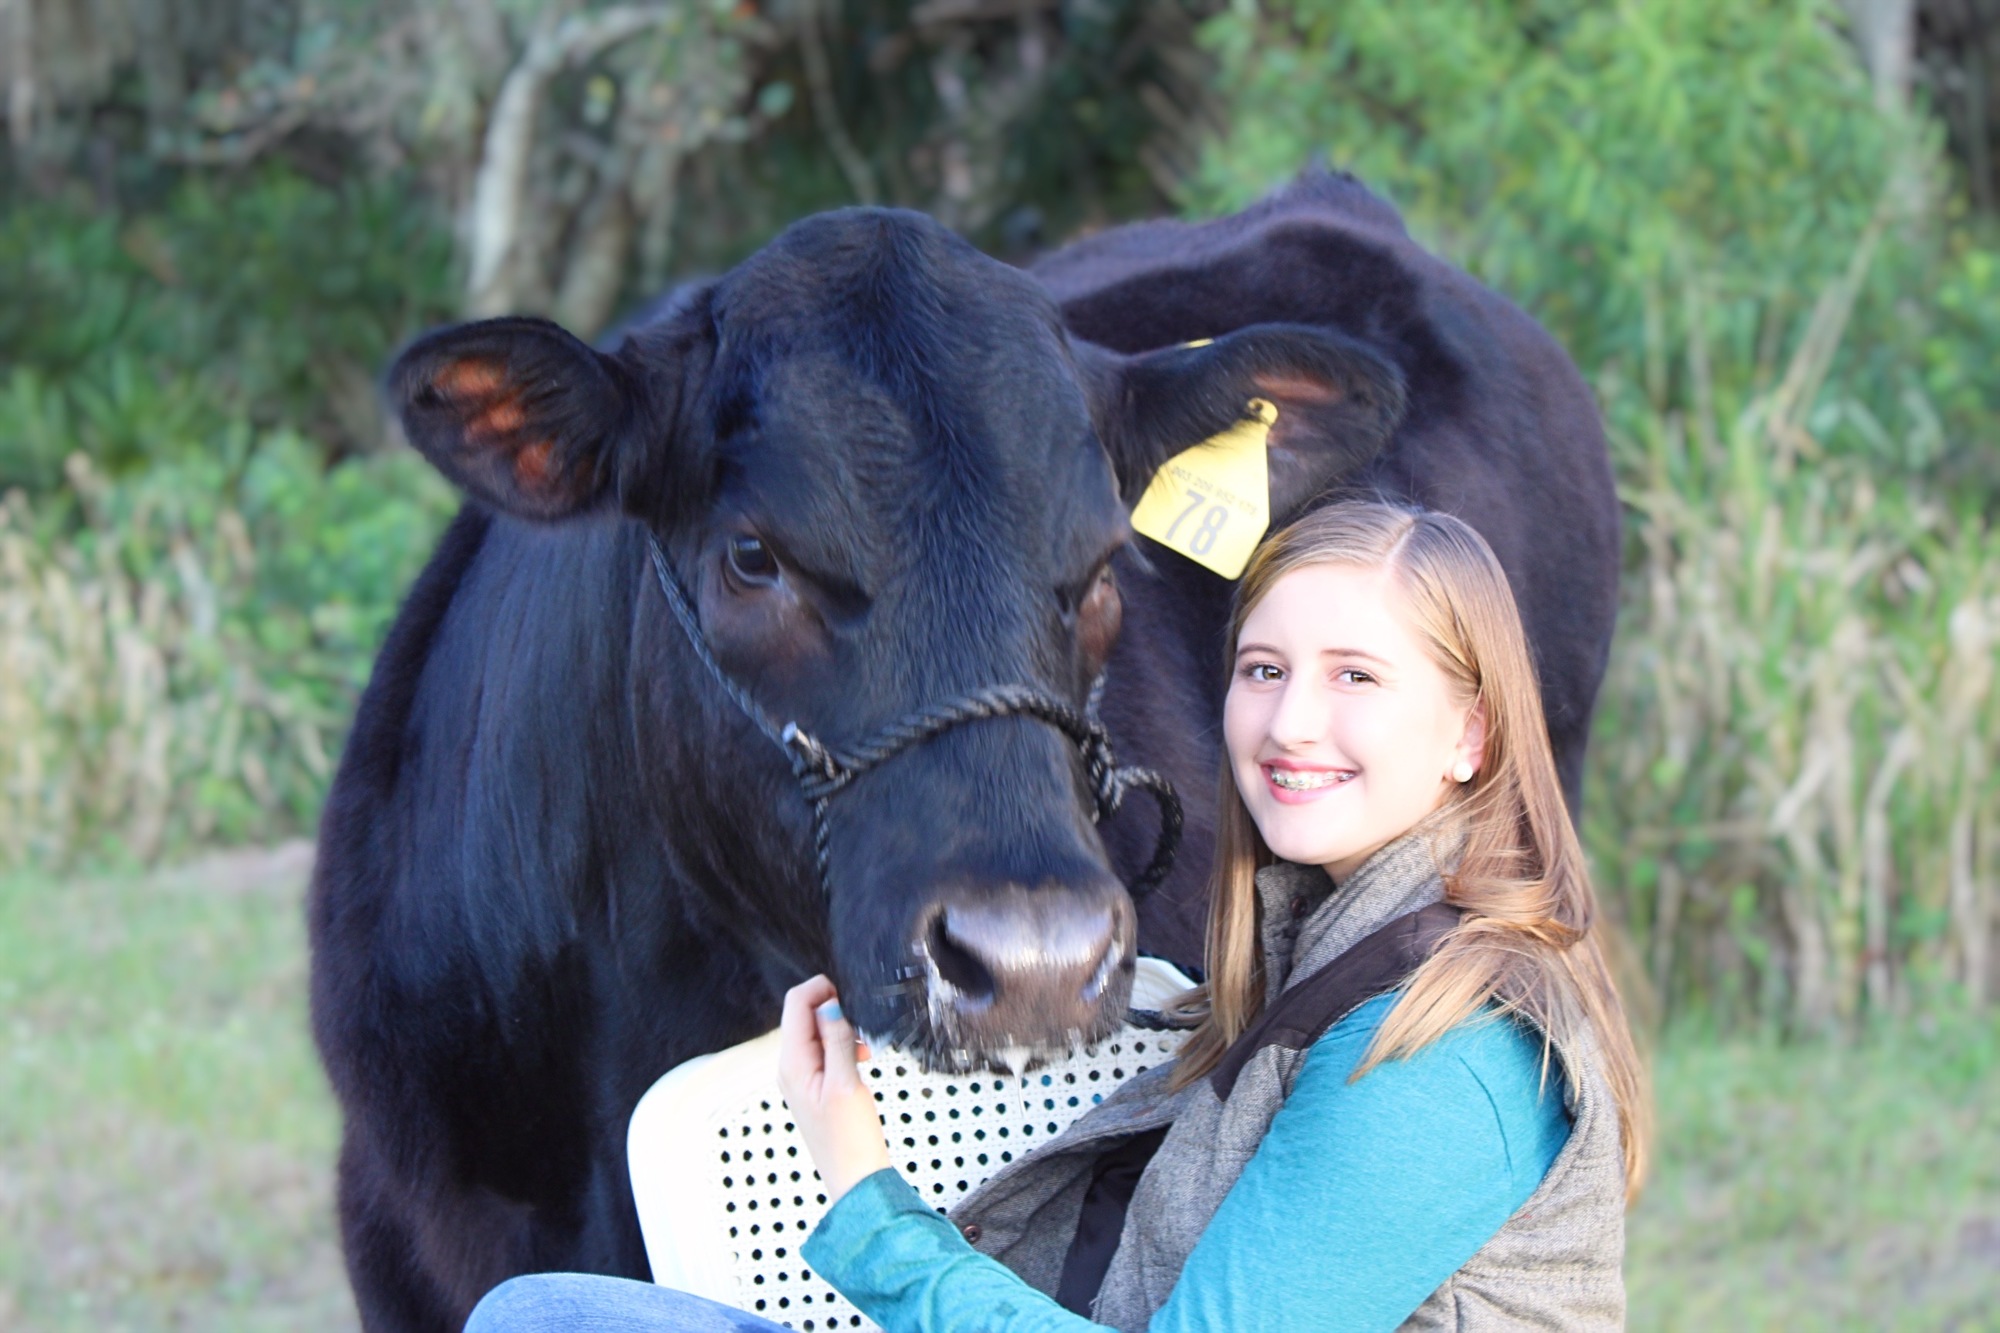 Emma Radley, a sophomore at Braden River High School, will show her steer, Bingo, who weighs around 1,500 pounds, at the fair.